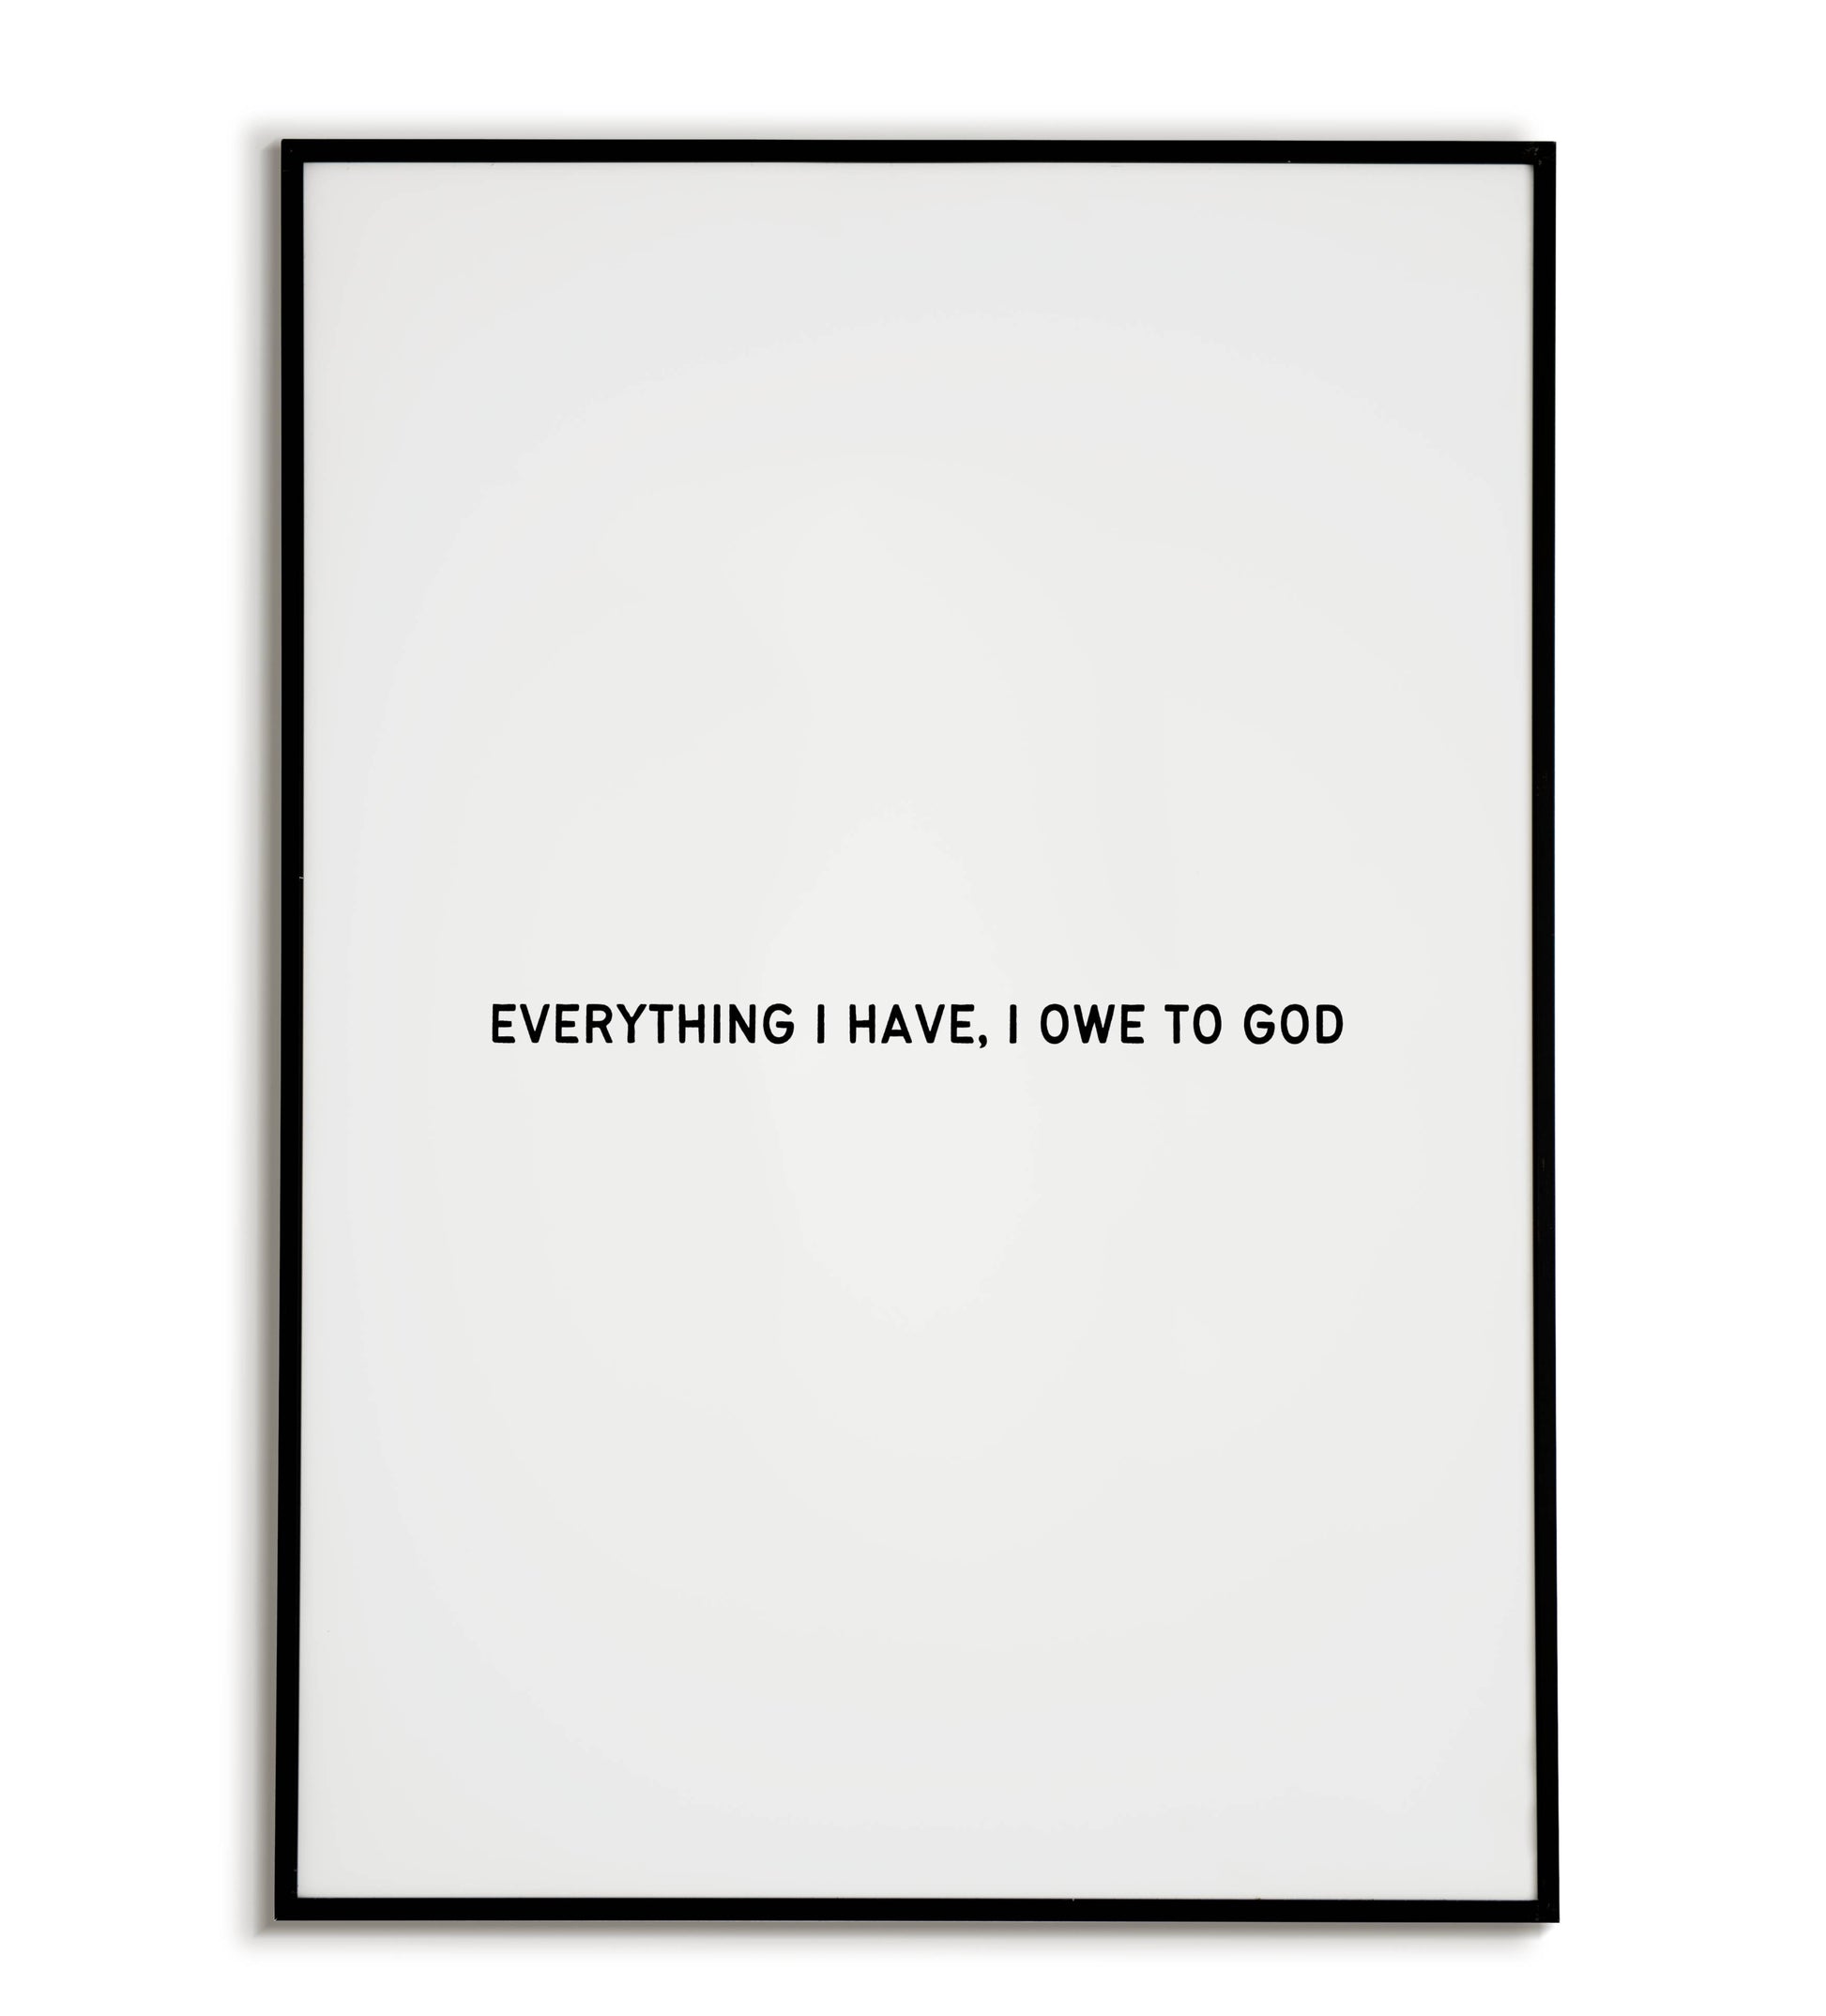 Everything I Have I Owe to God - Printable Wall Art / Poster. Inspirational quote expressing gratitude for faith.